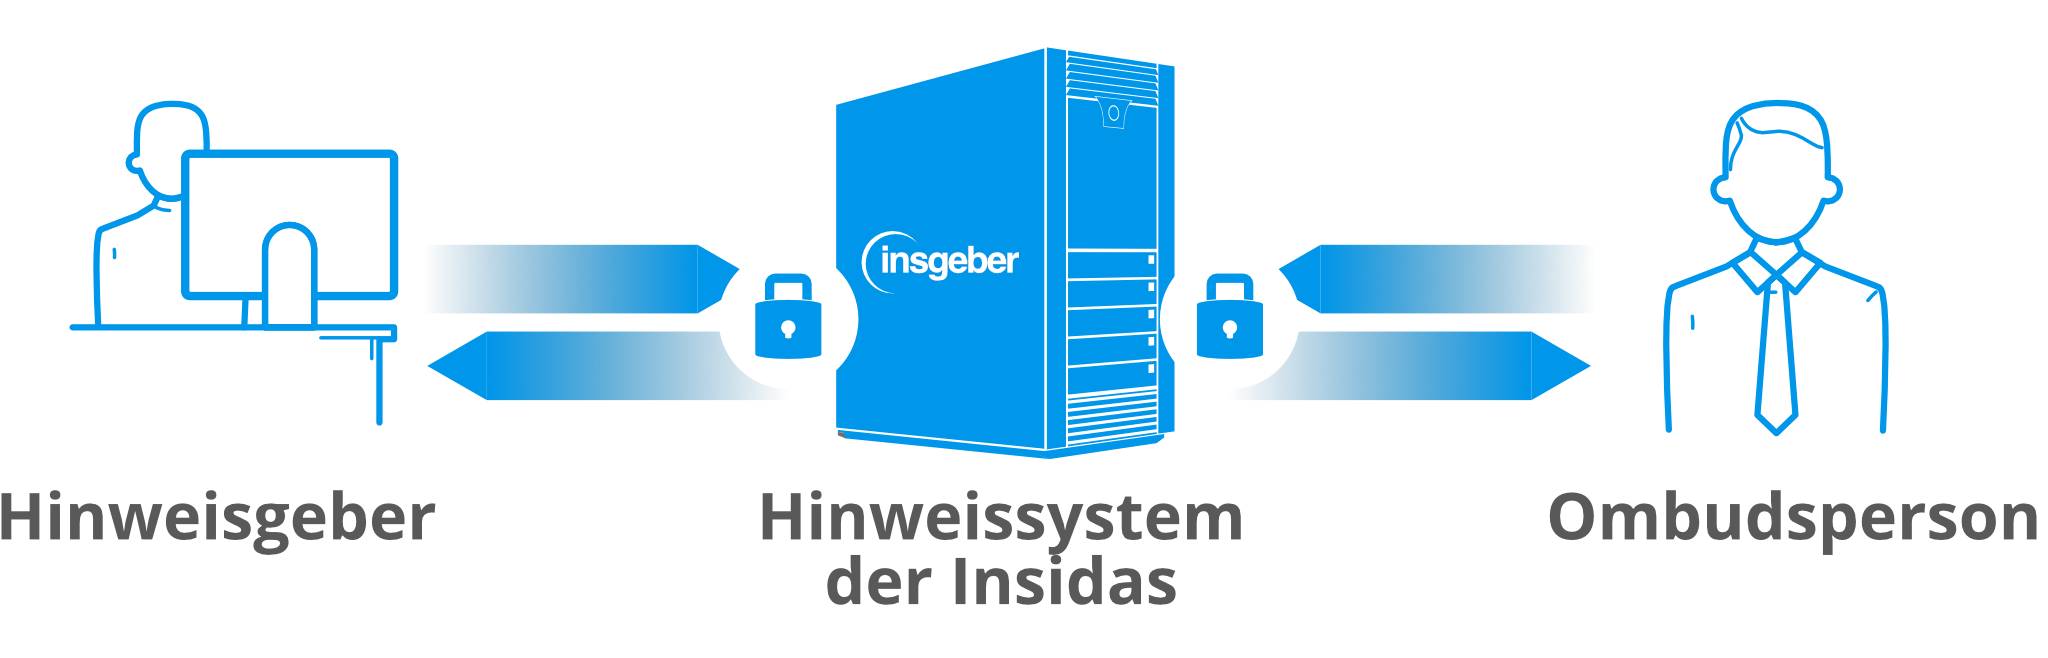 insgeber: Funktionsweise des Hinweisgebersystems